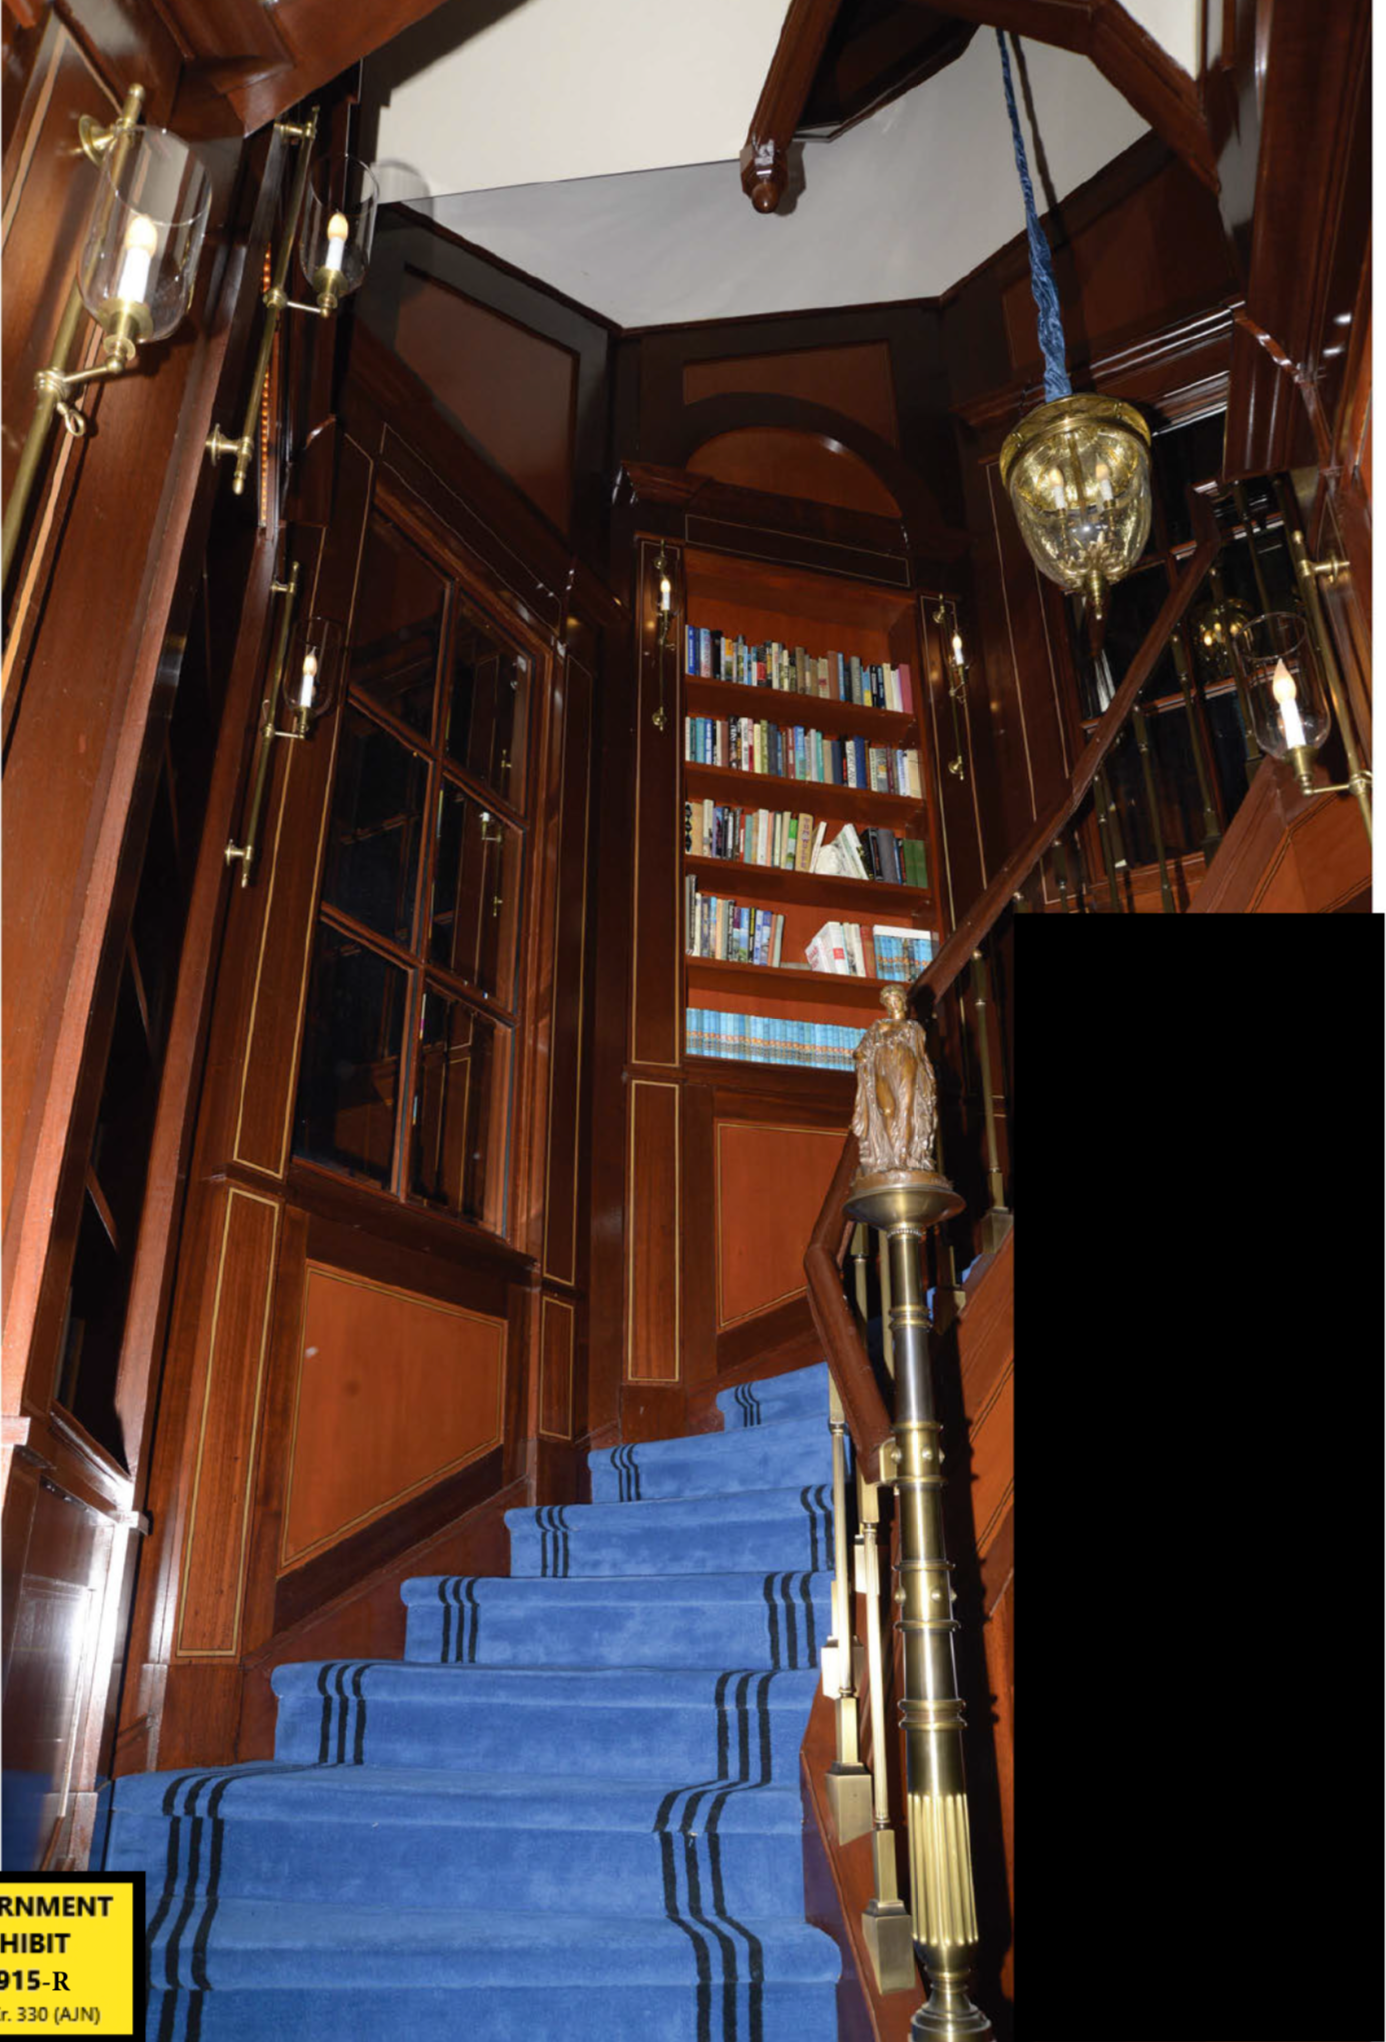 A second staircase in the middle of Epstein’s residence connected the 2nd floor to bedrooms on the 3rd and 4th floors